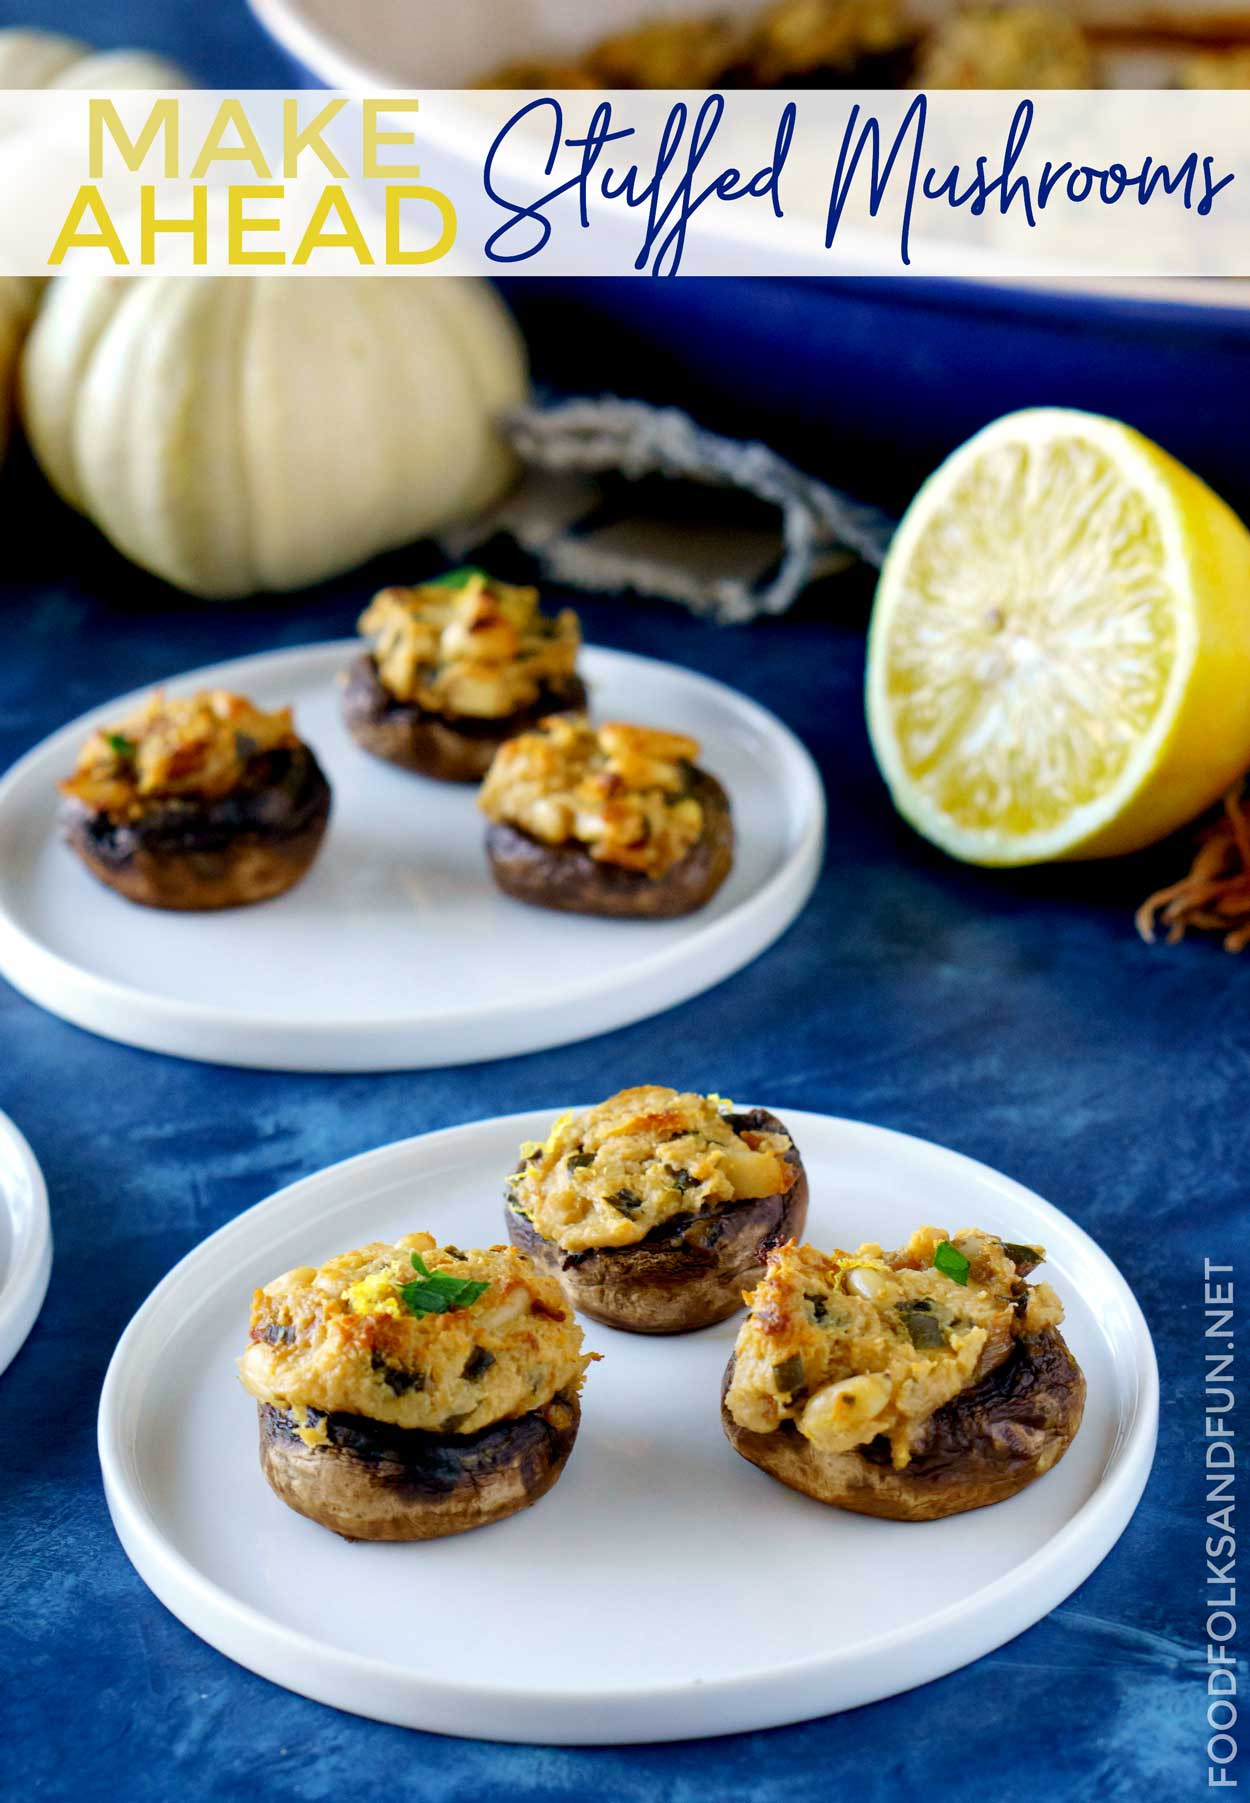 Best Ever Stuffed Mushrooms
 Make Ahead Stuffed Mushrooms with Goat Cheese and Pine